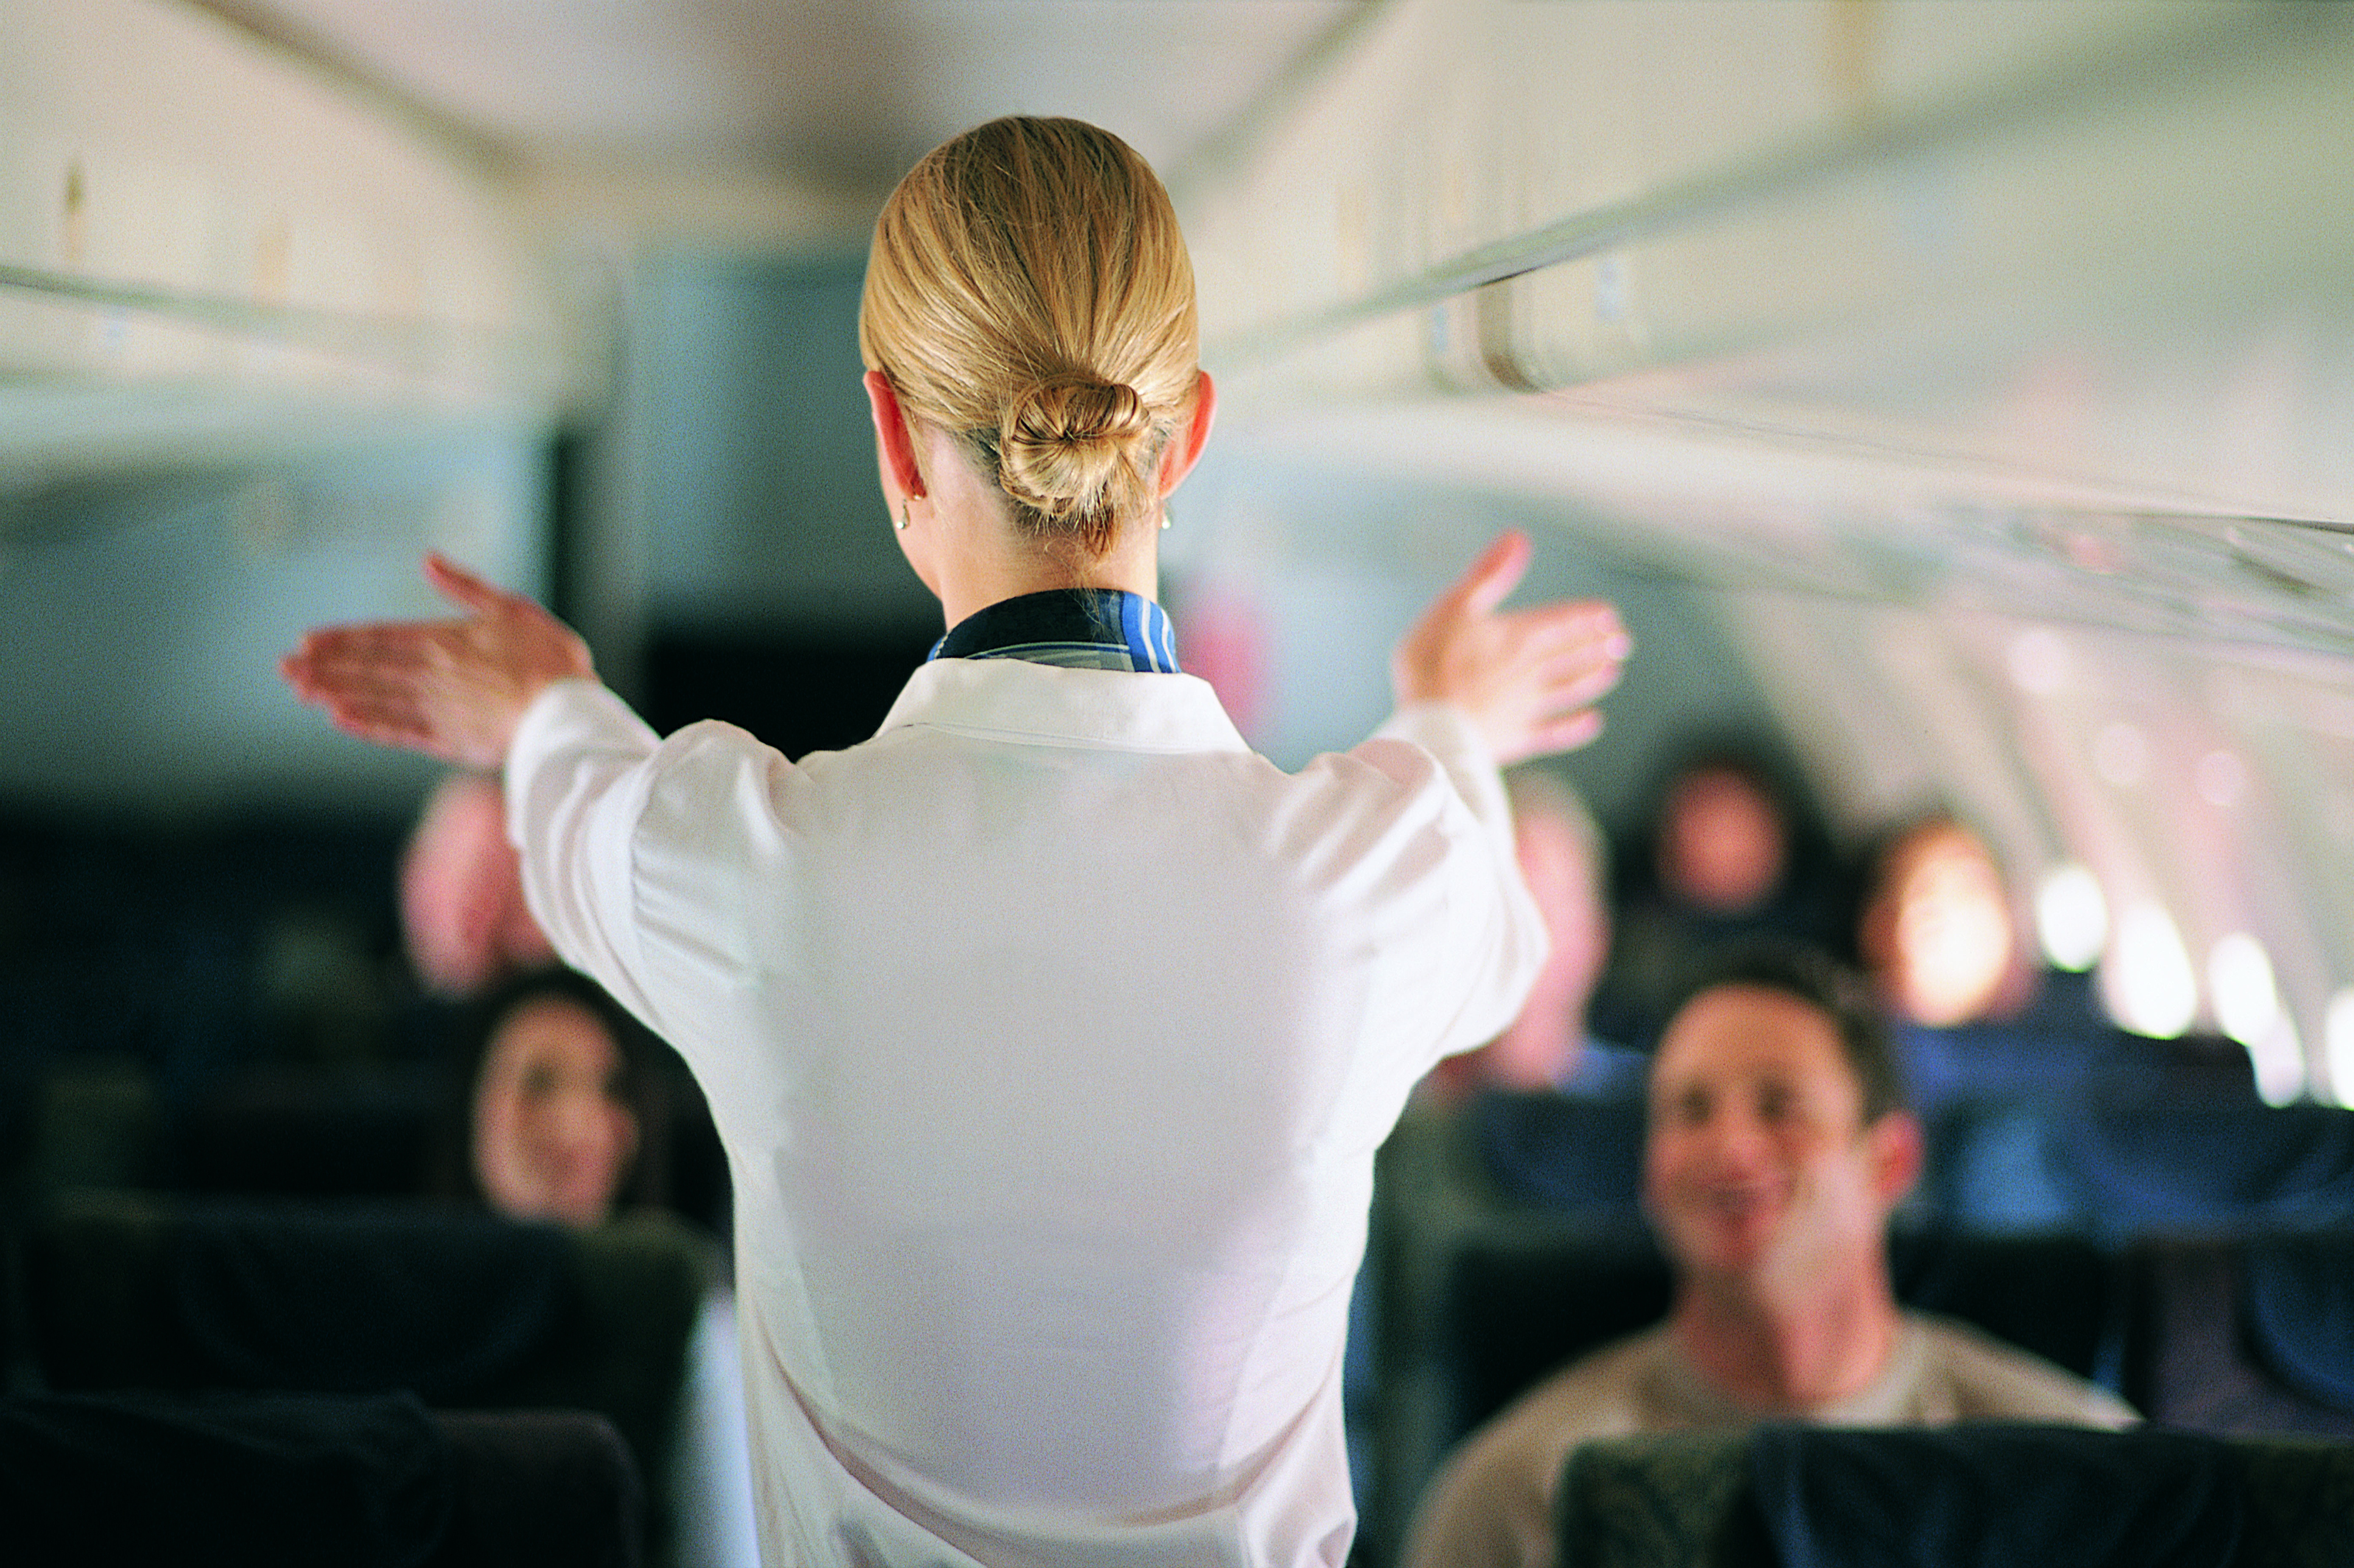 Want to Get Paid to Travel? This Airline Is Hiring More Than 1,000 Flight Attendants